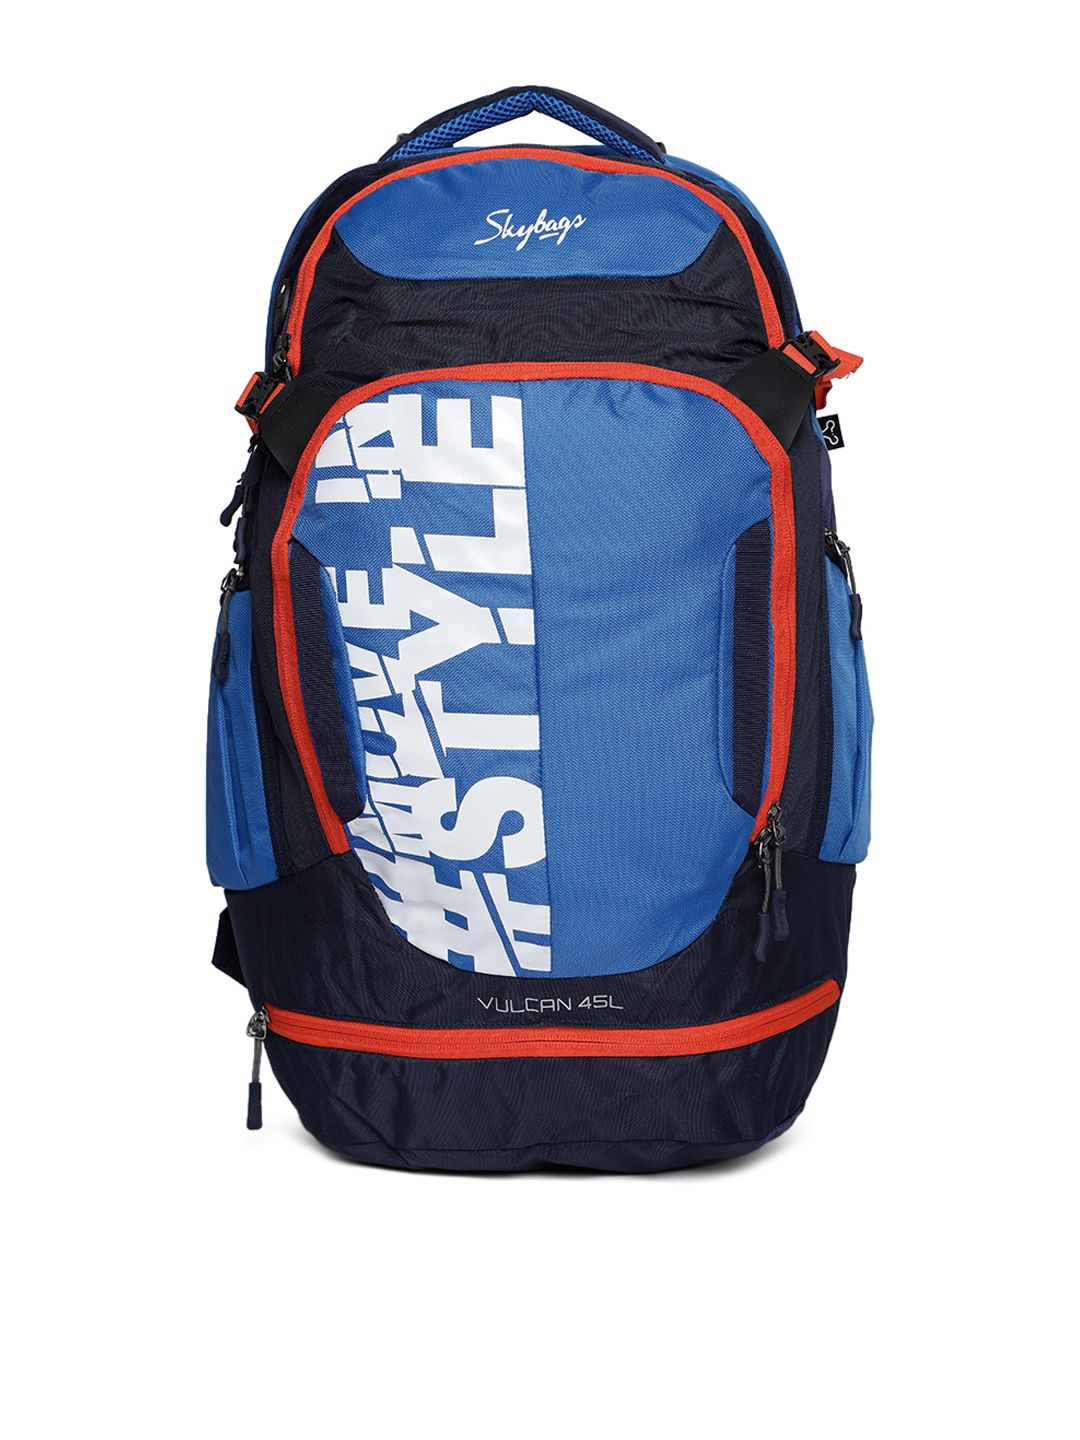 Skybags Unisex Blue Typography Backpack Price in India